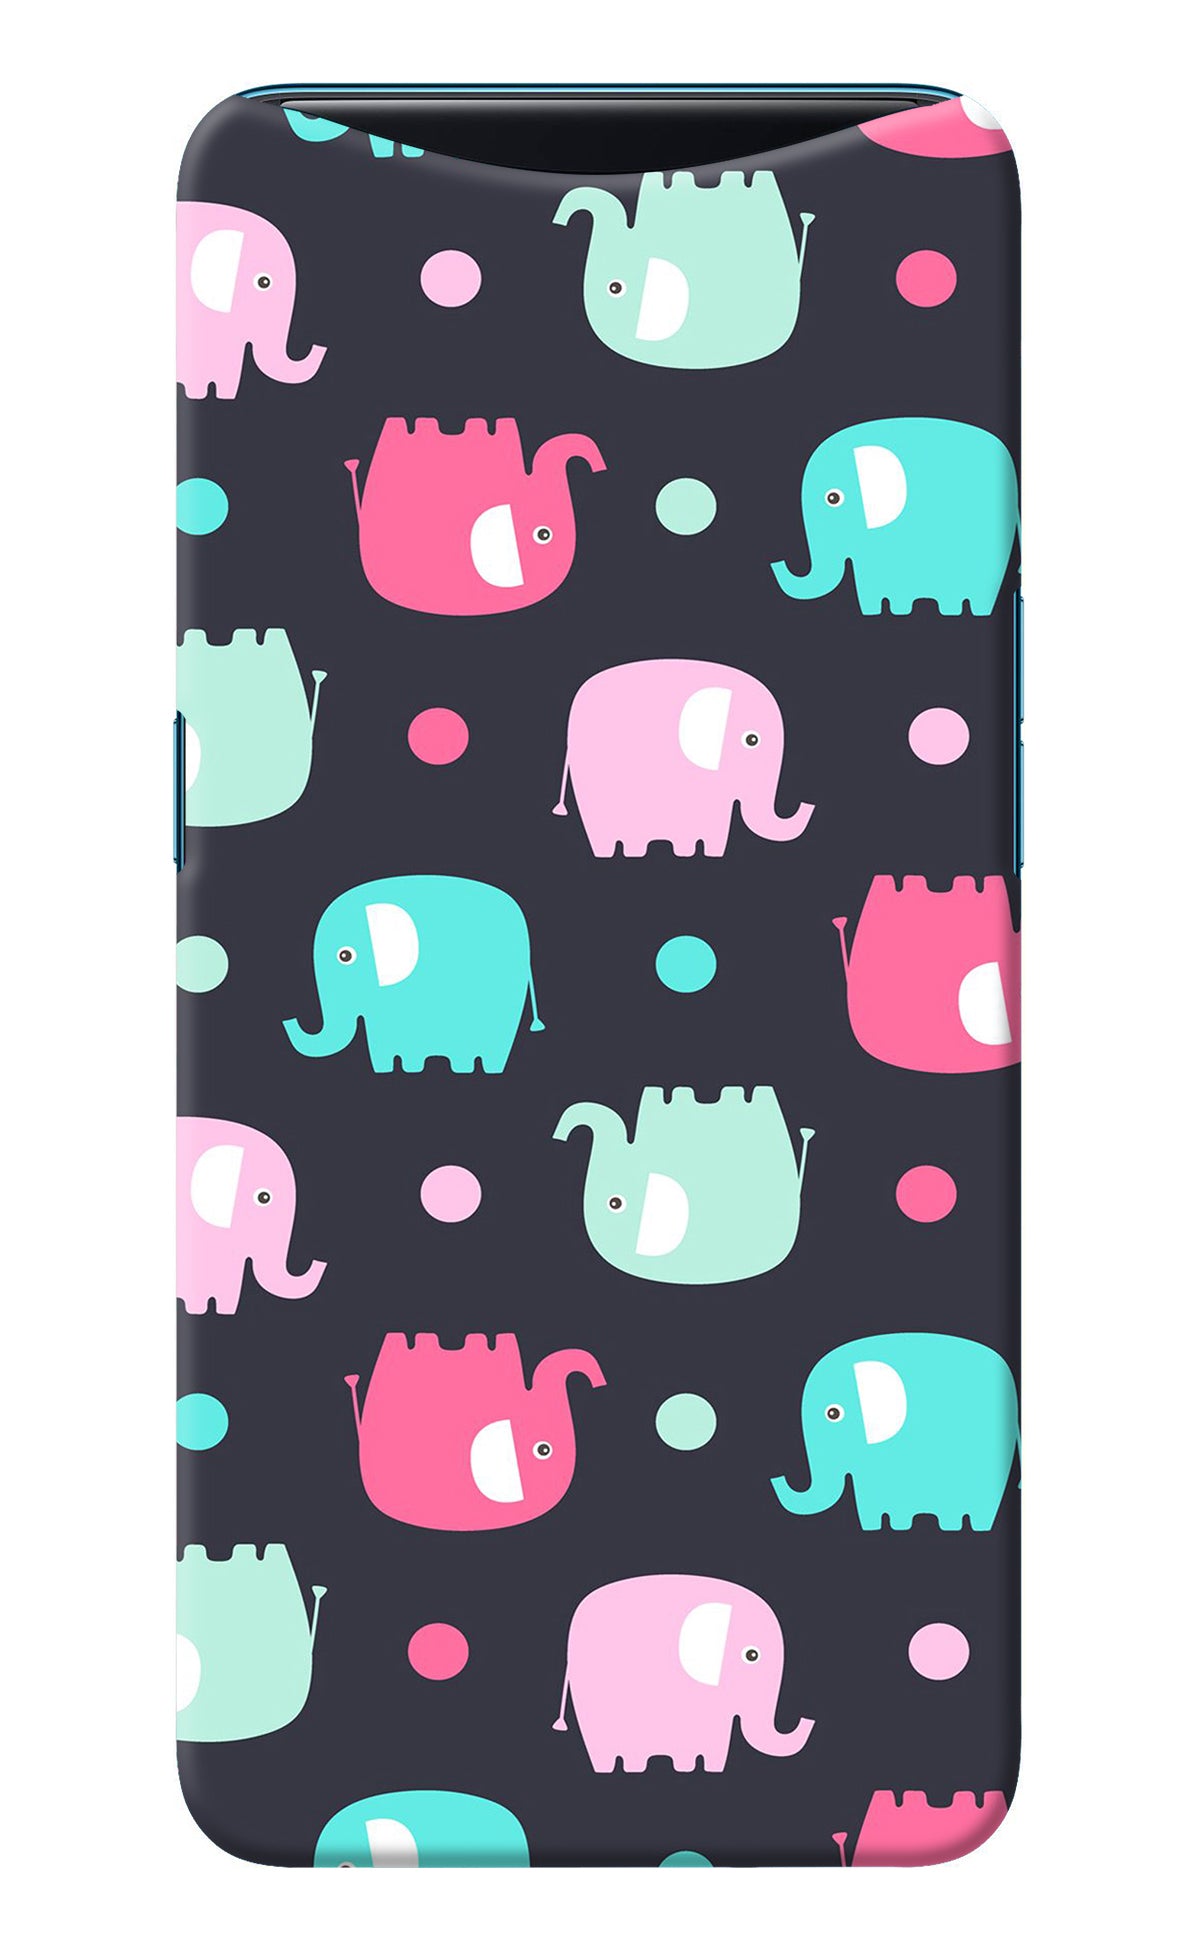 Elephants Oppo Find X Back Cover